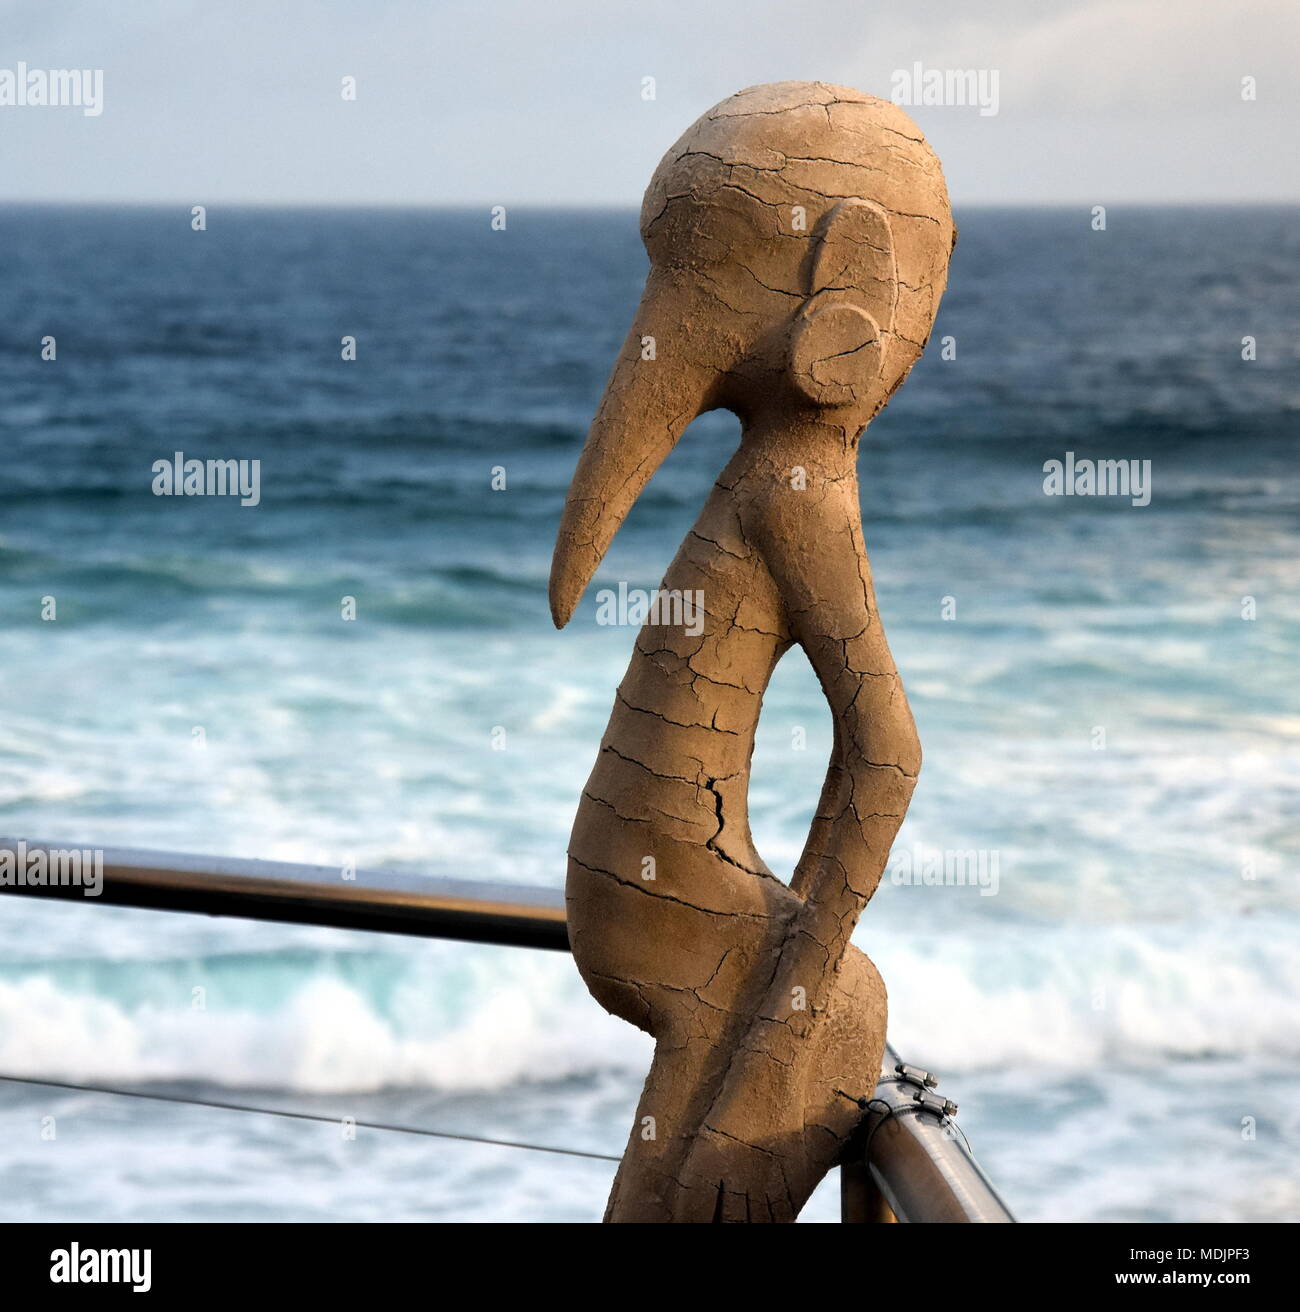 Sydney, Australia - Oct 27, 2017. Jeremy Sheehan: Rise and Fall. Sculpture by the Sea along the Bondi to Coogee coastal walk is the world's largest fr Stock Photo